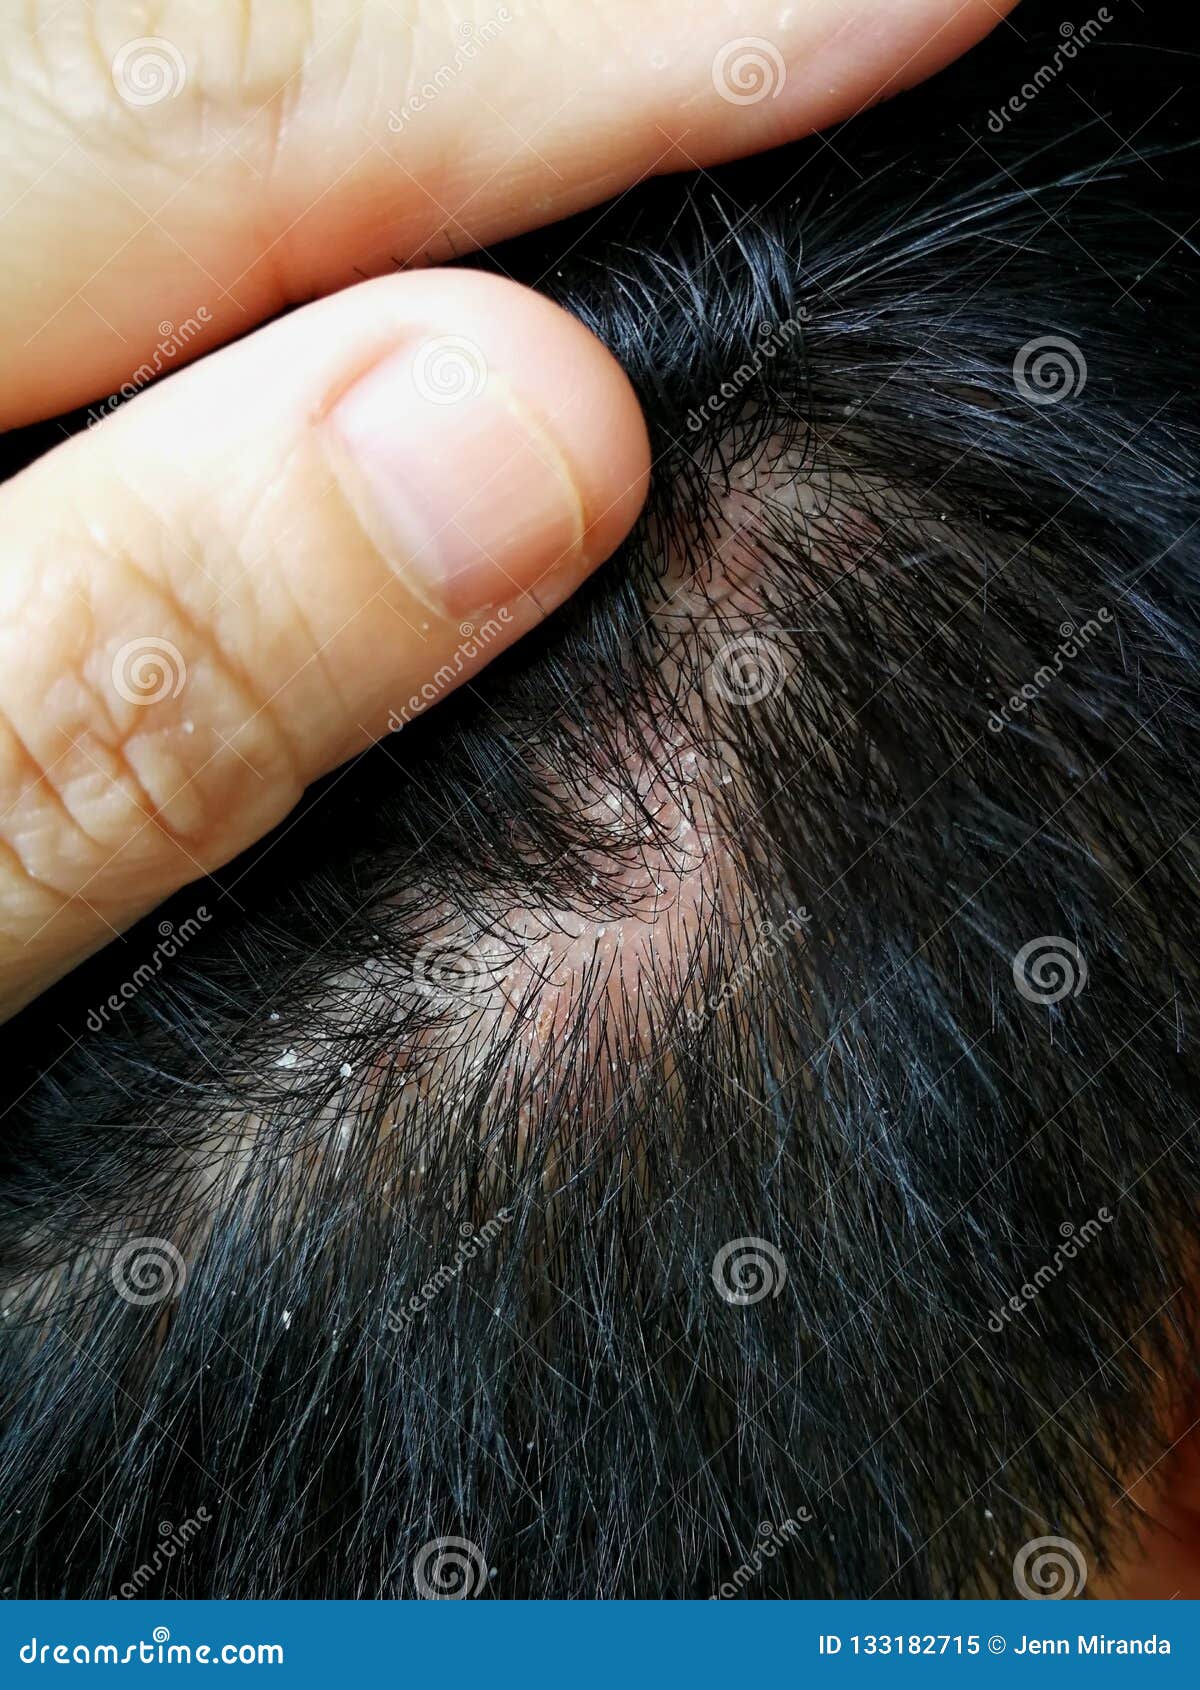 Scaly Scalp and Dandruff stock image. Image of germ - 133182715